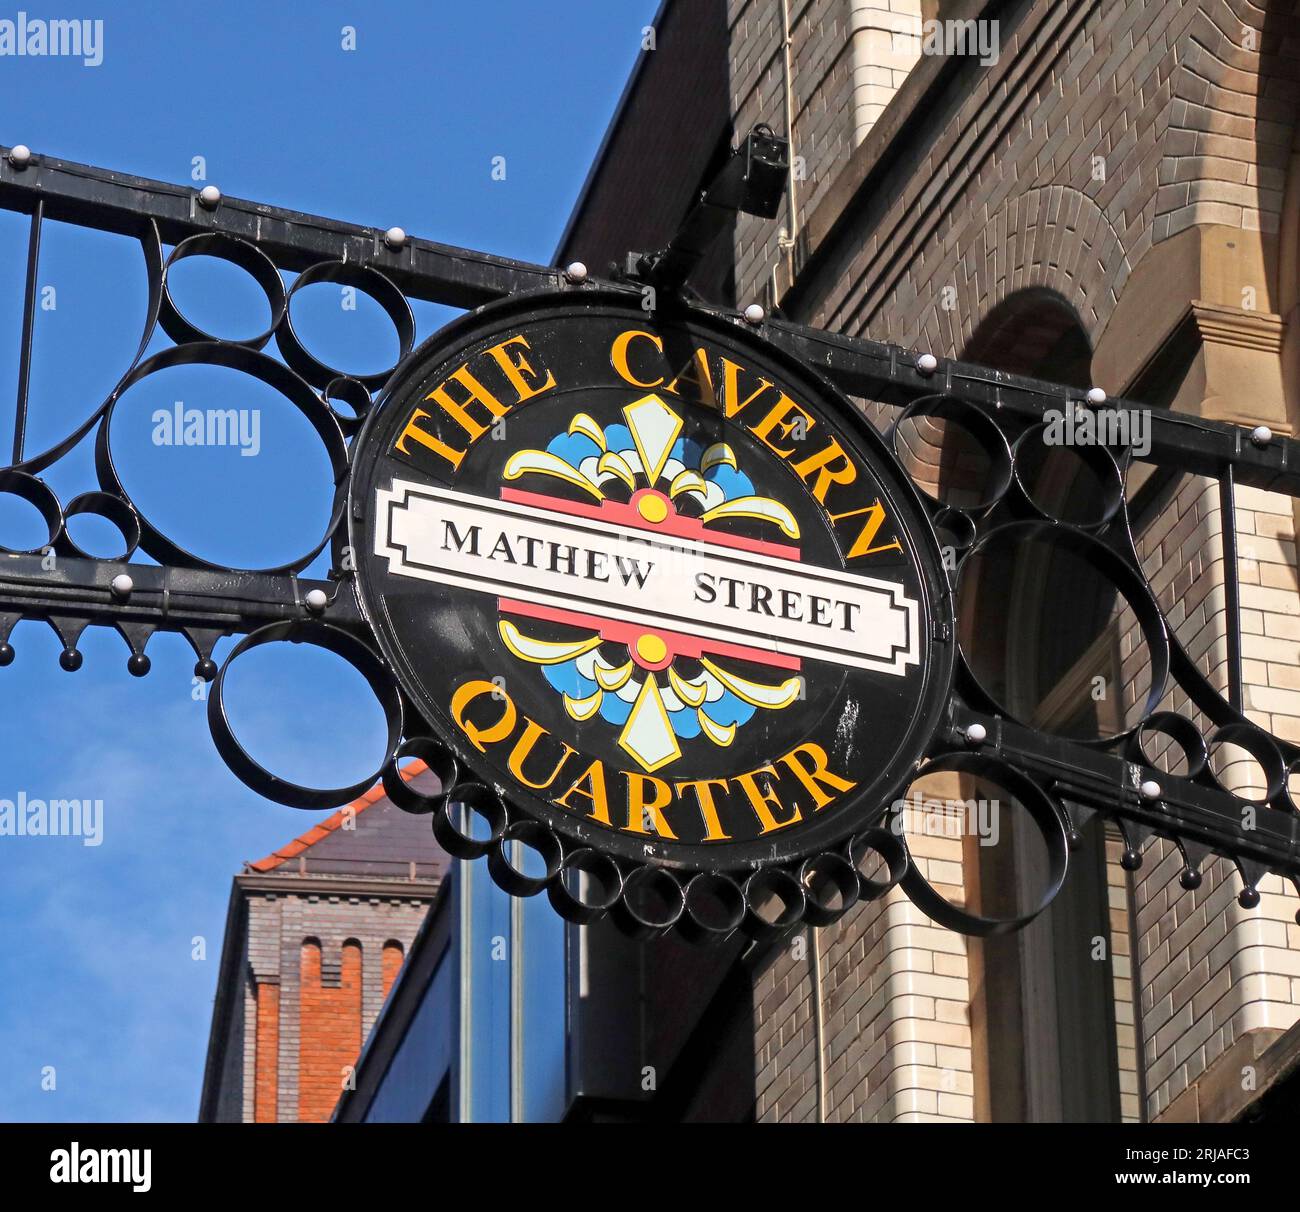 Mathew Street, The Cavern Quarter, Liverpool, Merseyside, Angleterre, ROYAUME-UNI, L2 6RE Banque D'Images